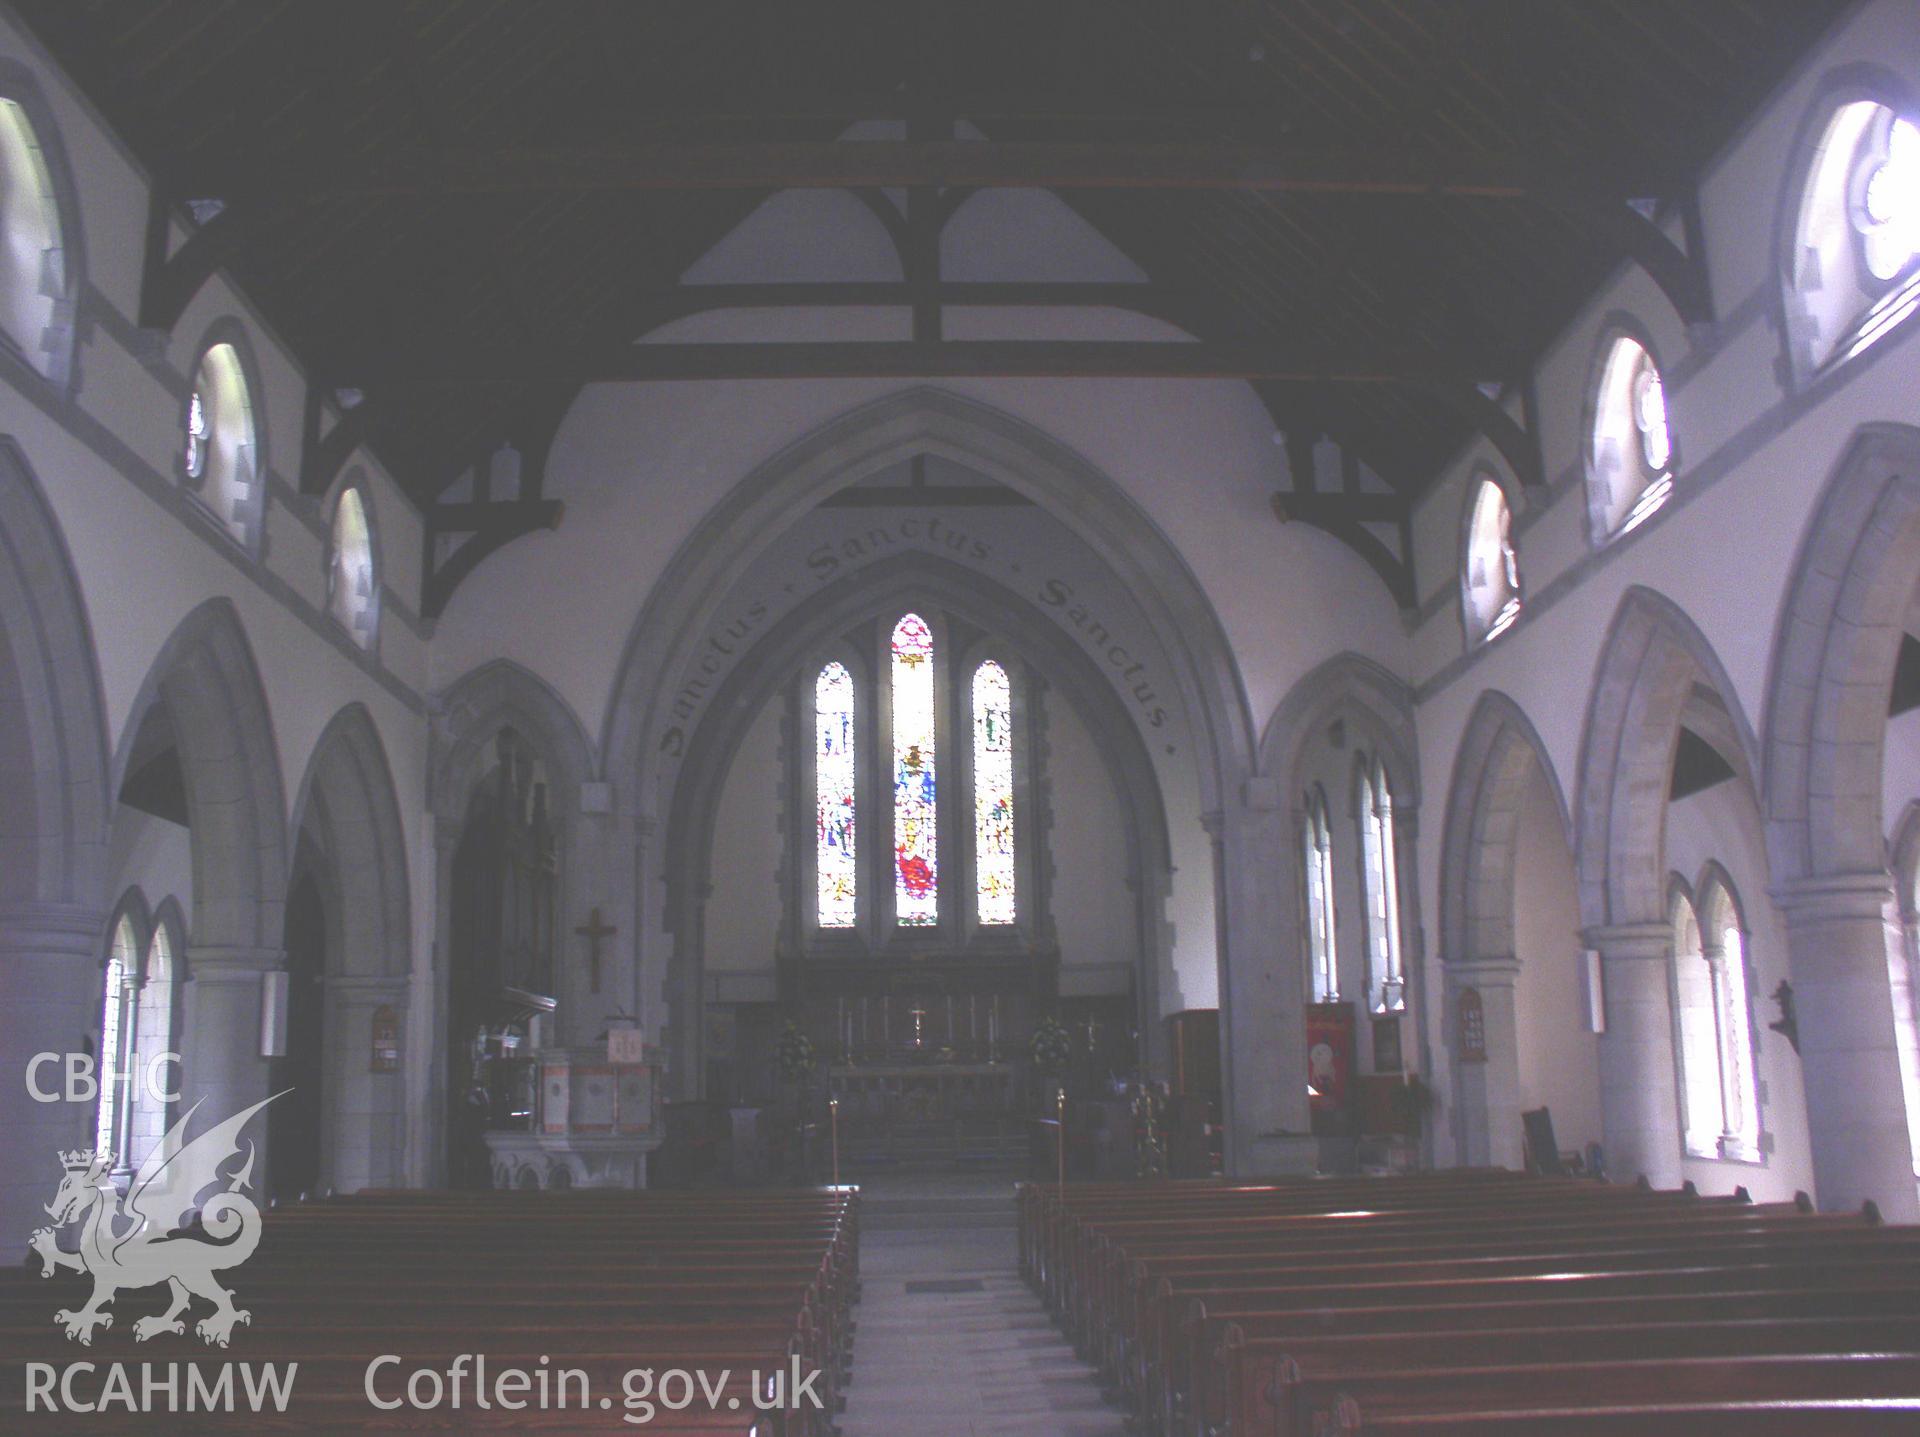 Colour digital photograph showing the interior of St Michael and All Angel's Church, Maesteg; Glamorgan.